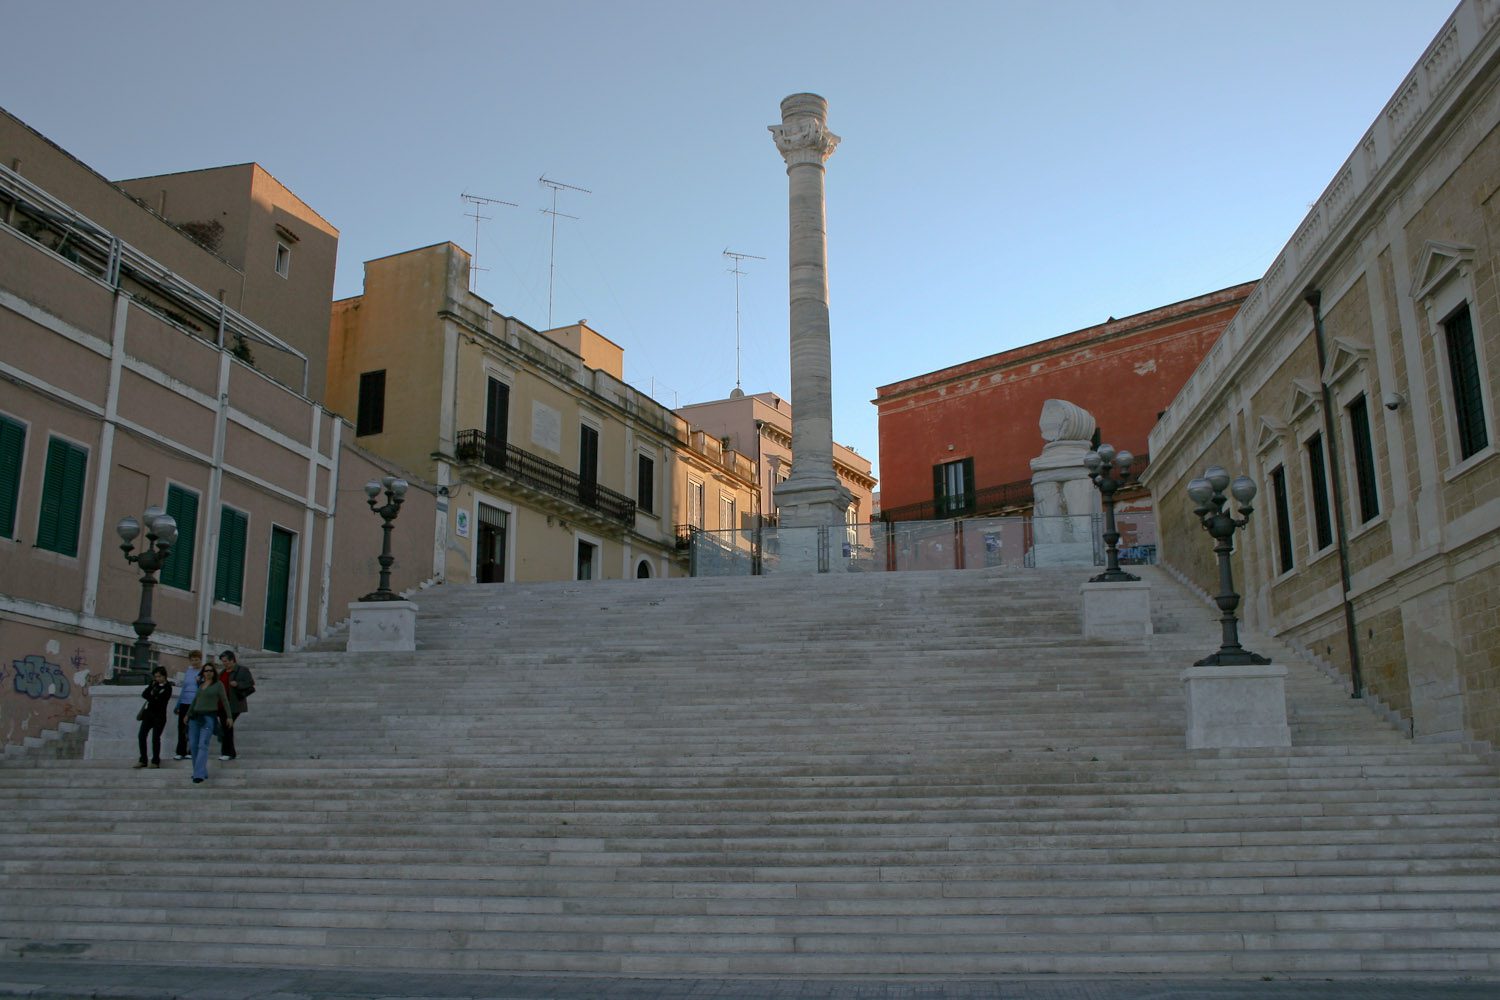 End of the Appian Way in Brindisi